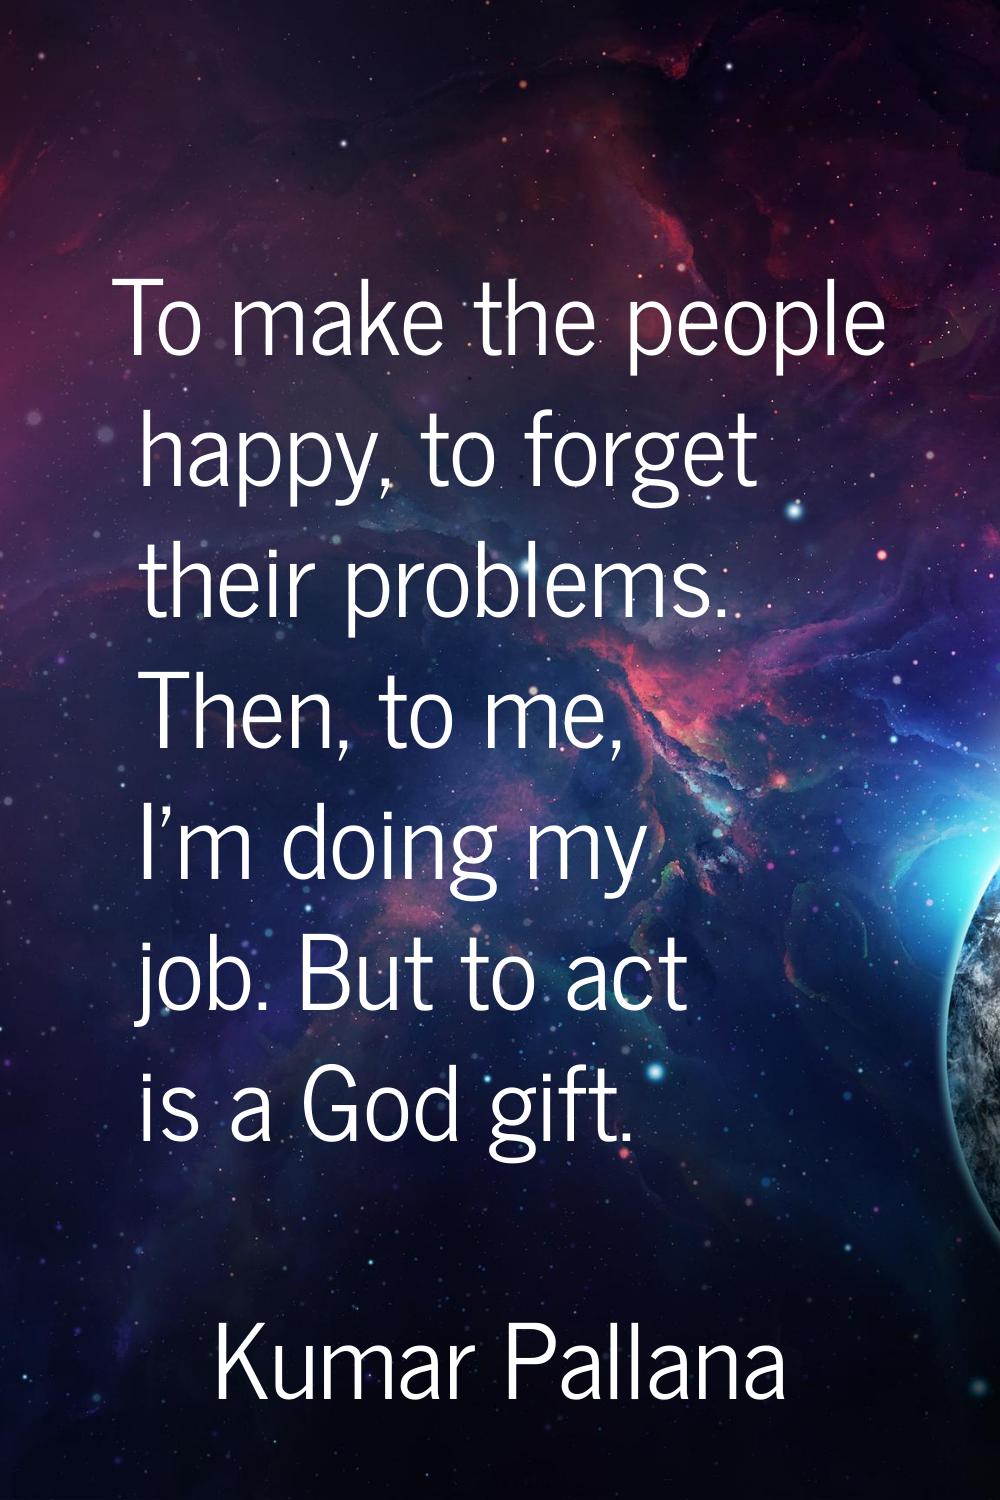 To make the people happy, to forget their problems. Then, to me, I'm doing my job. But to act is a 